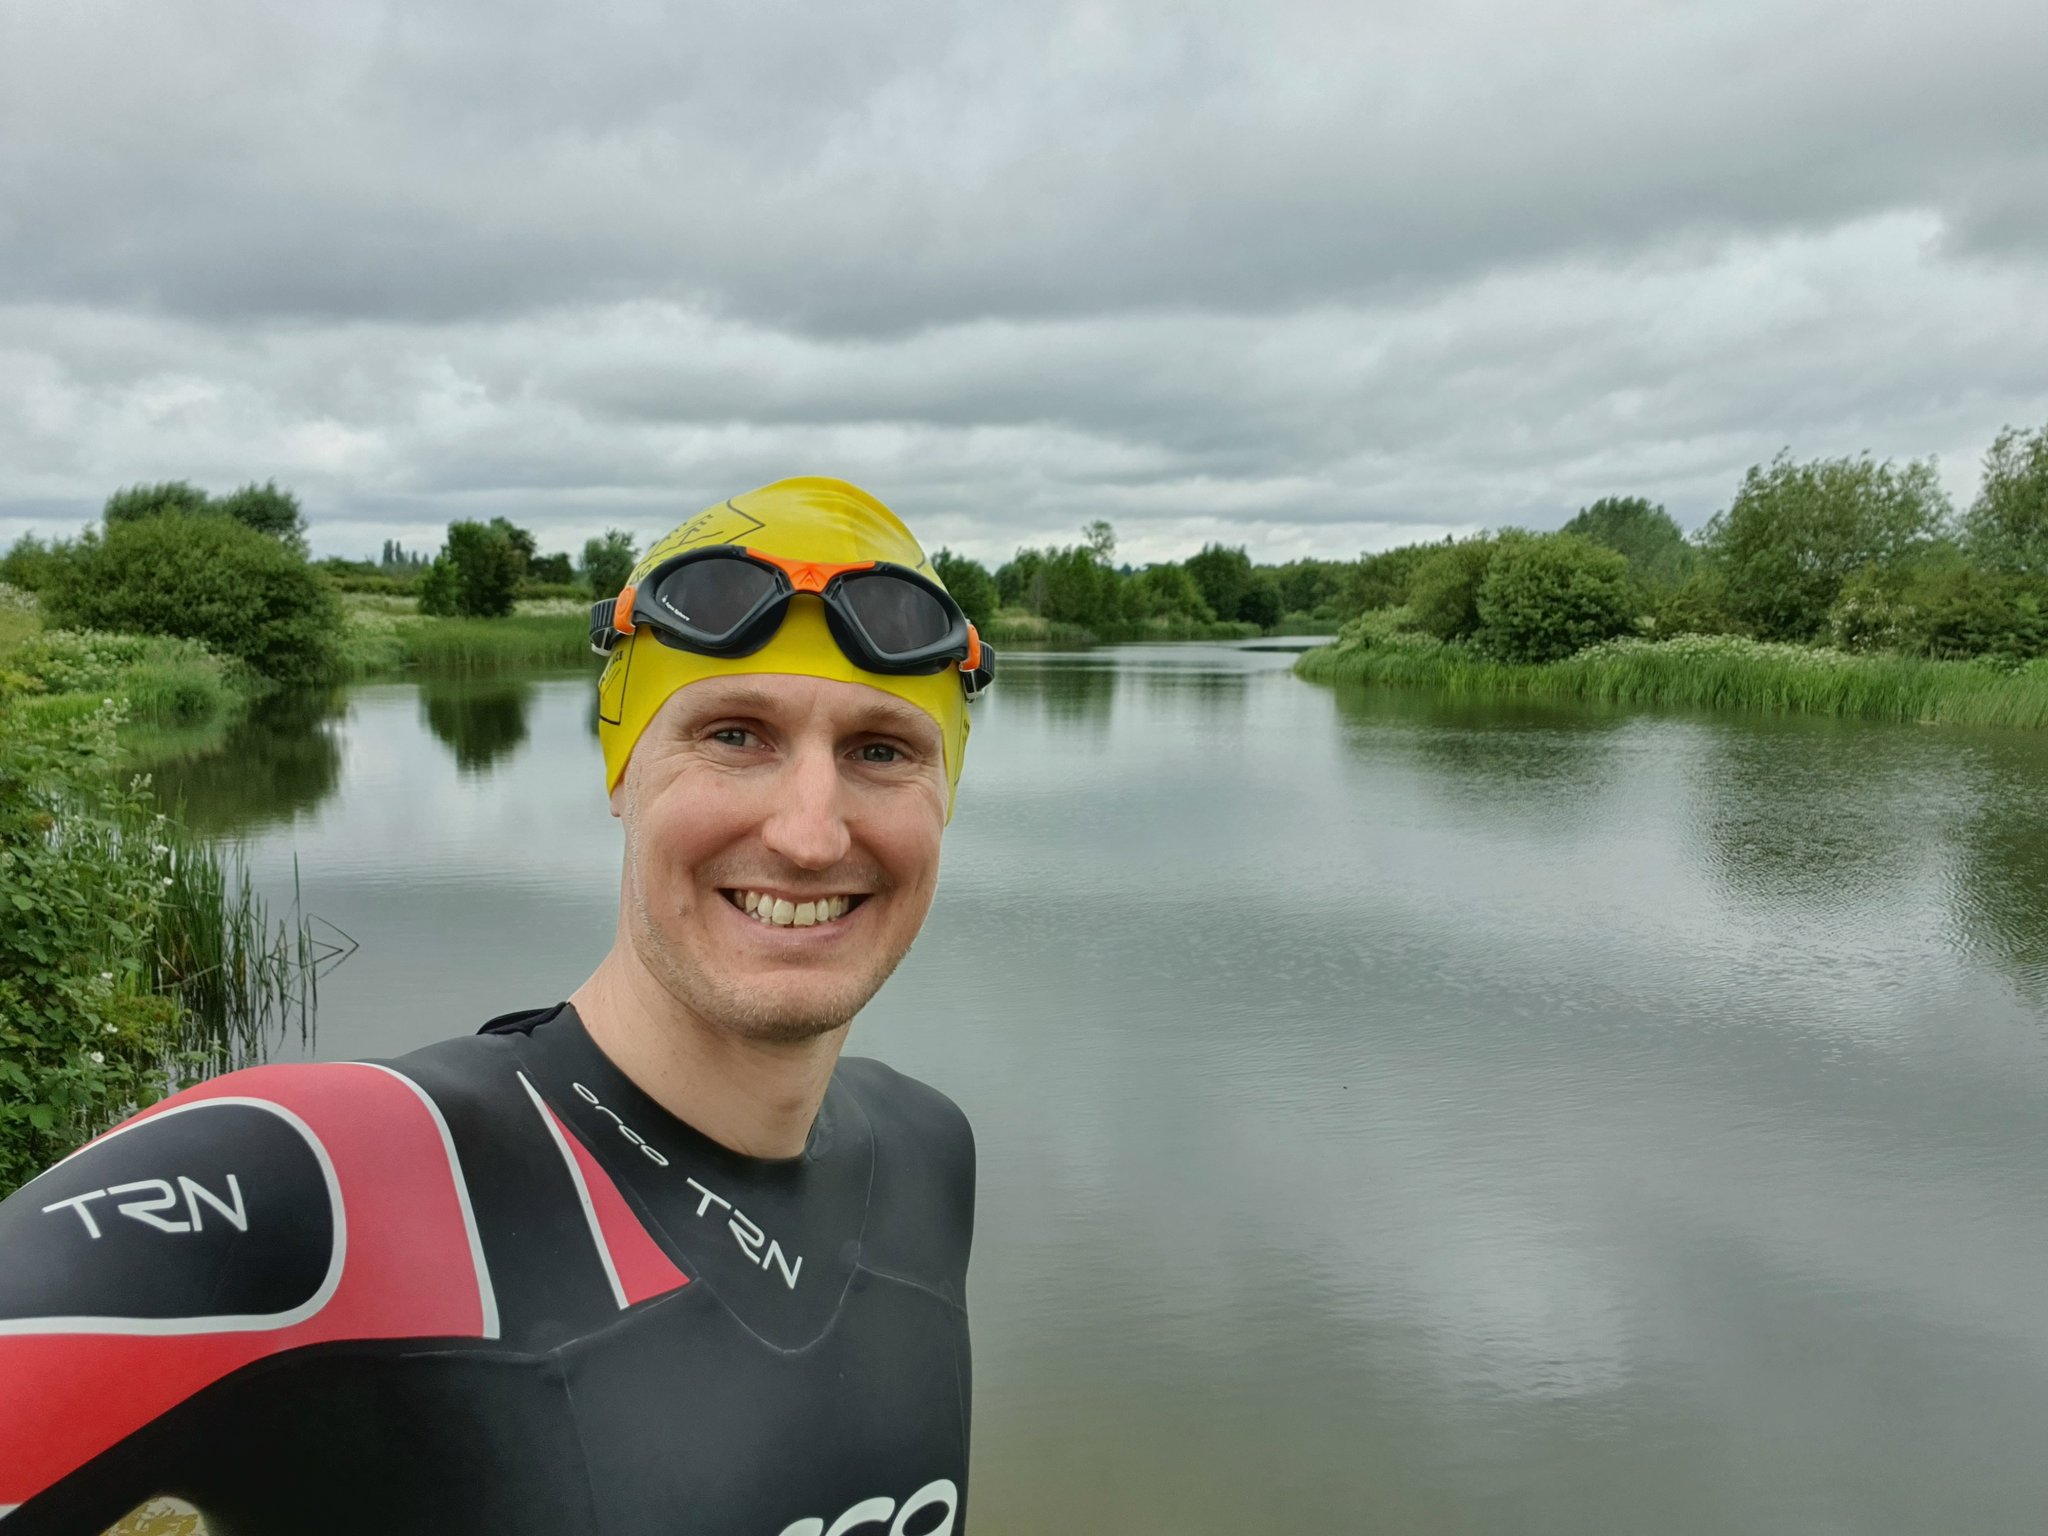 Toy industry member Martin Rowe in a wetsuit and swim cap by a river